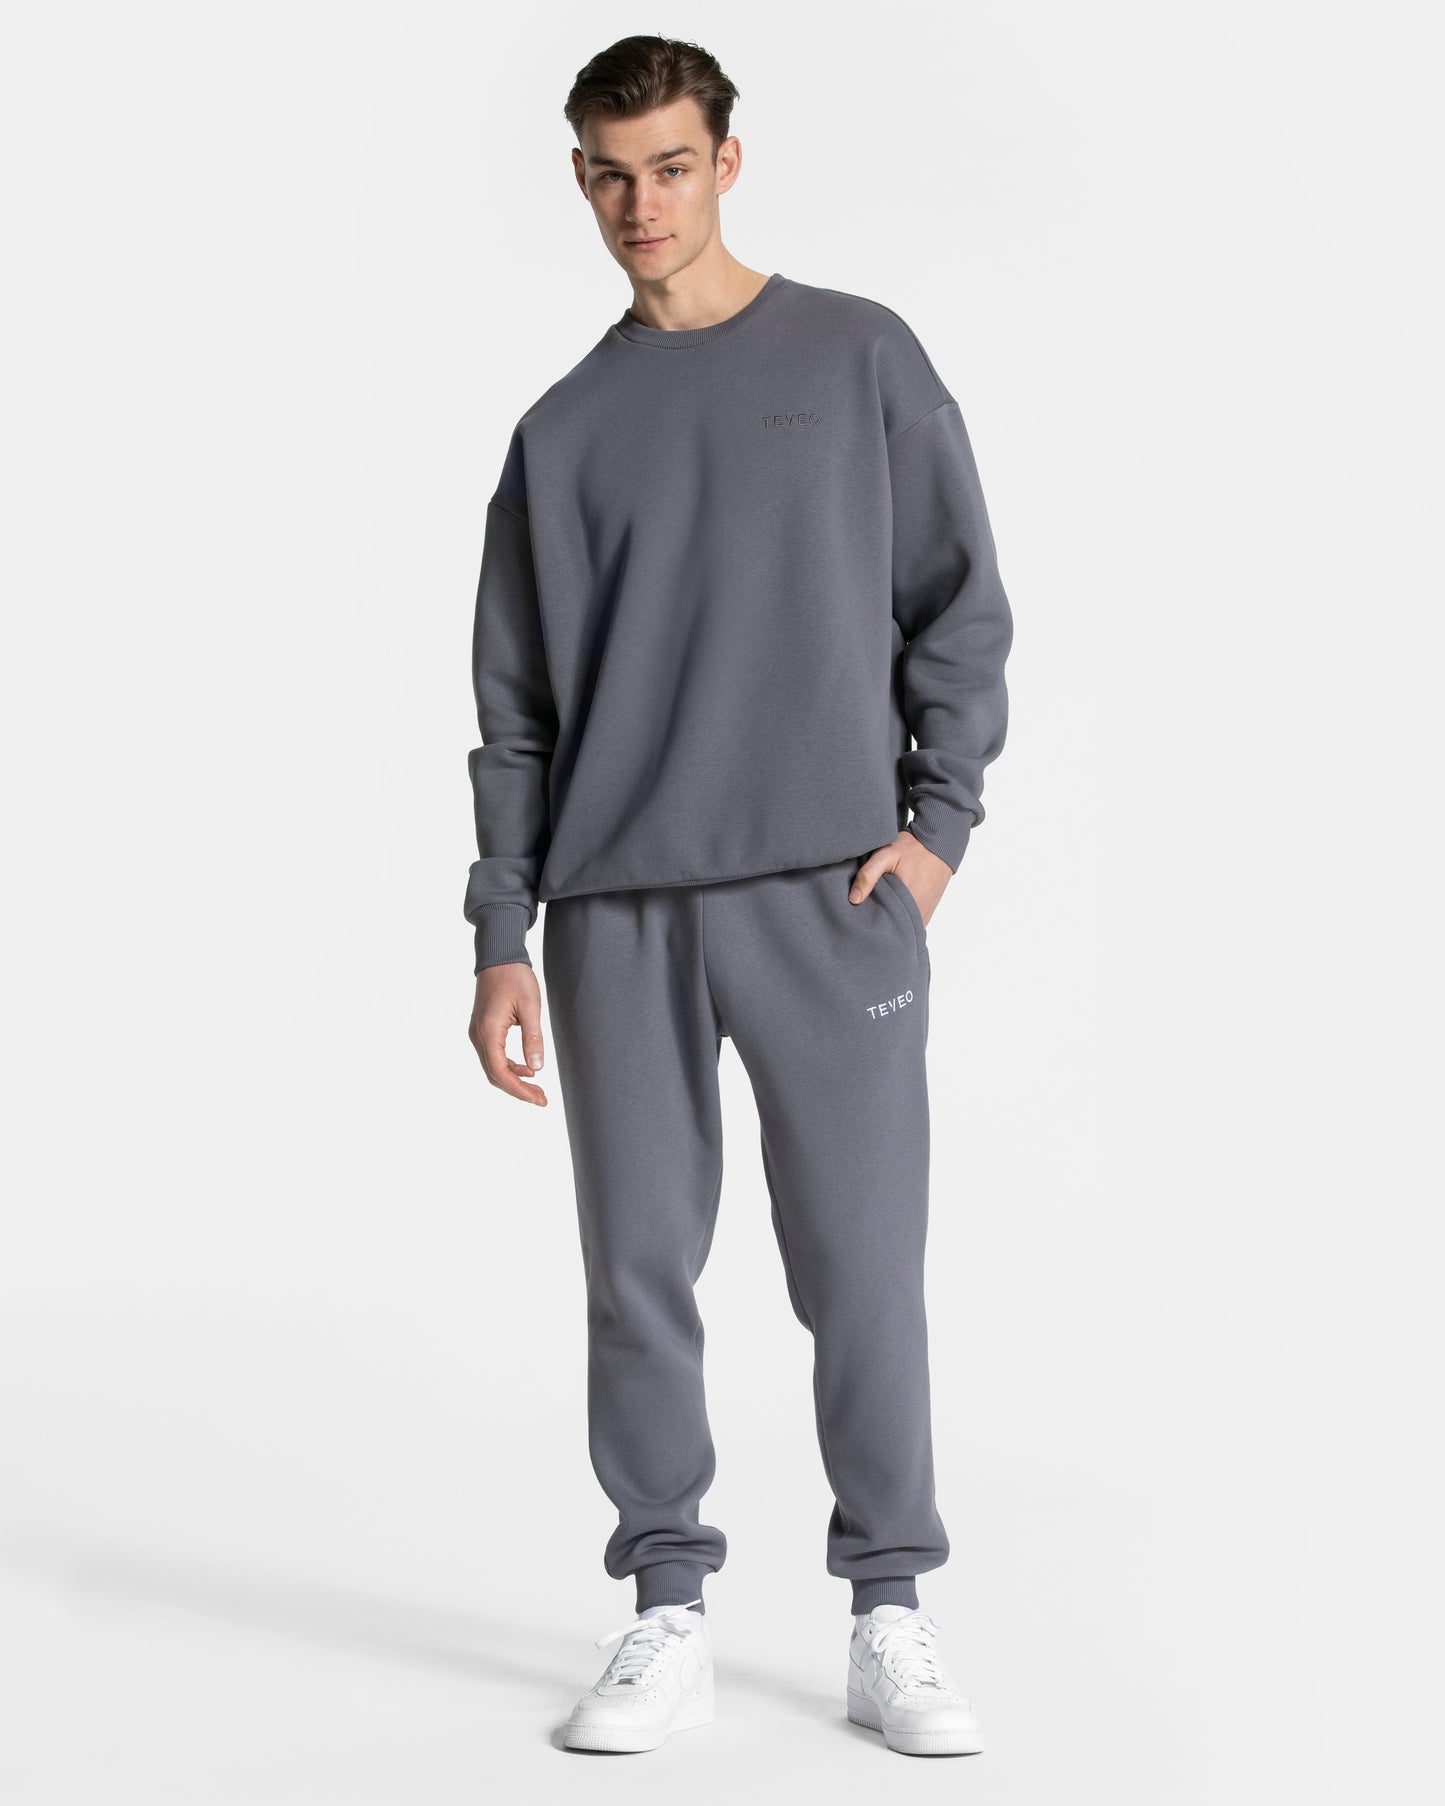 Arrival Jogger "Graphit"